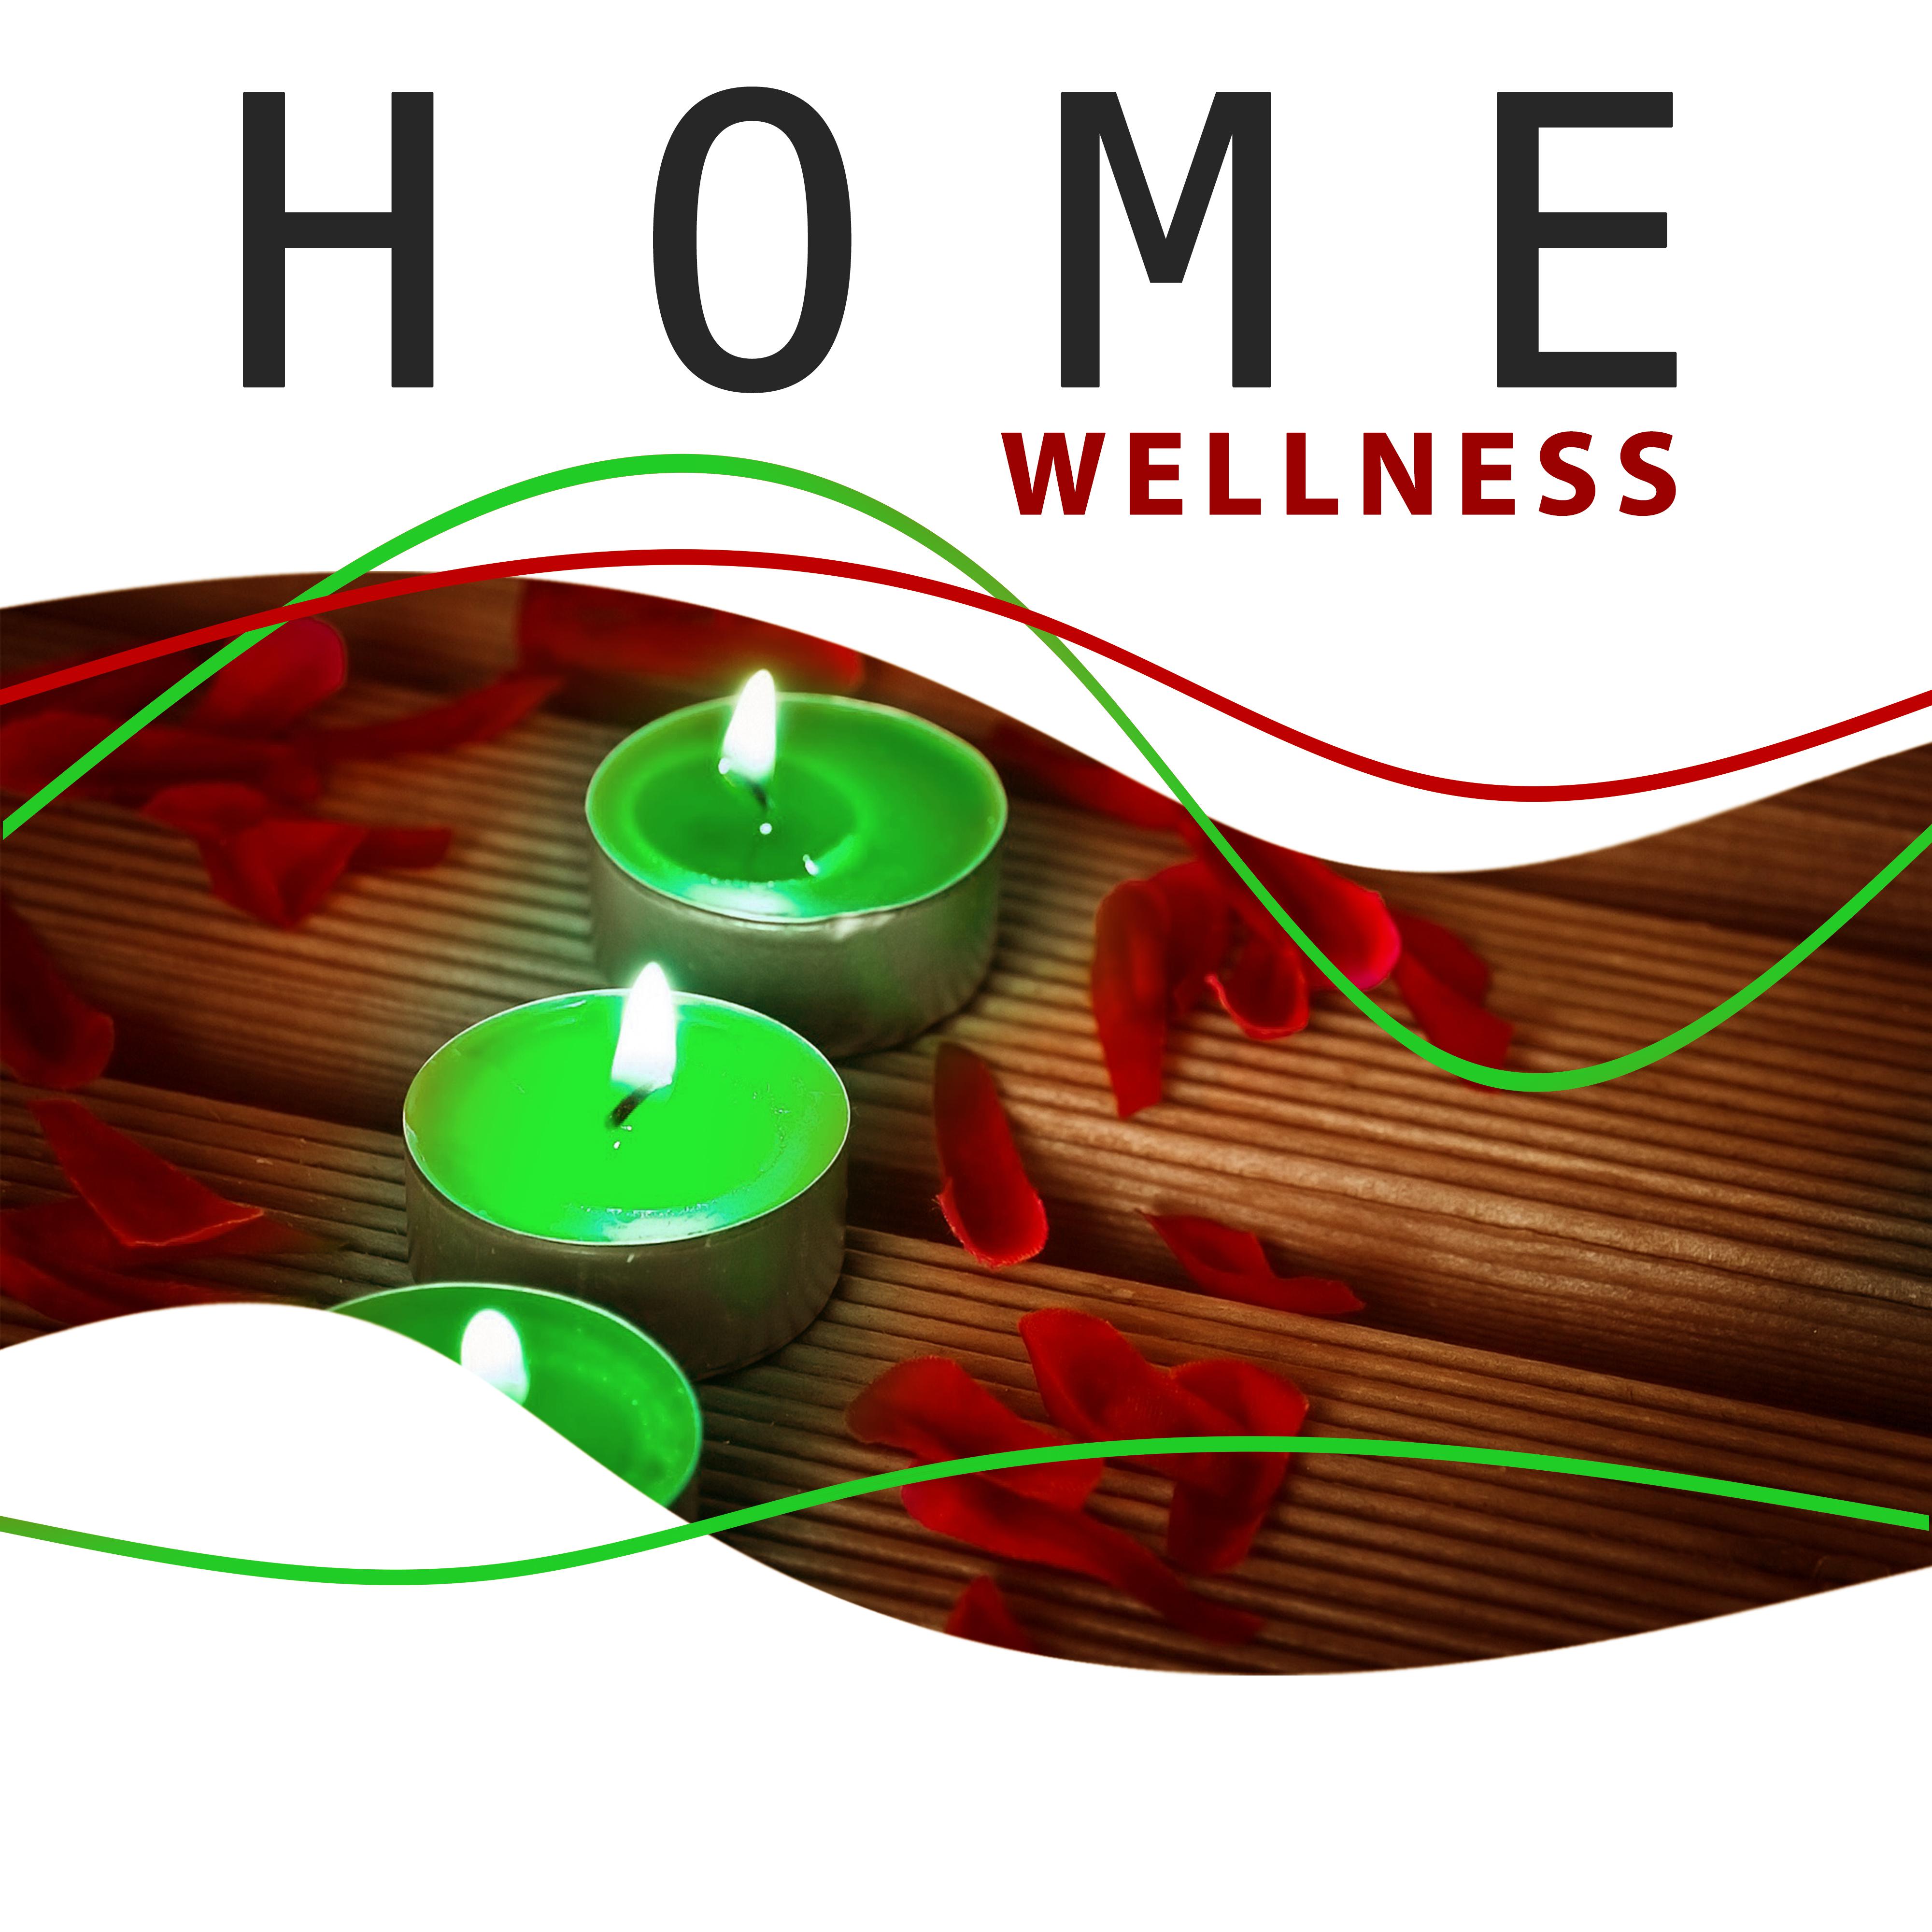 Home Wellness – Relaxation Music for Spa, Massage, Sounds of Nature for Soul and Body, Calm Mind